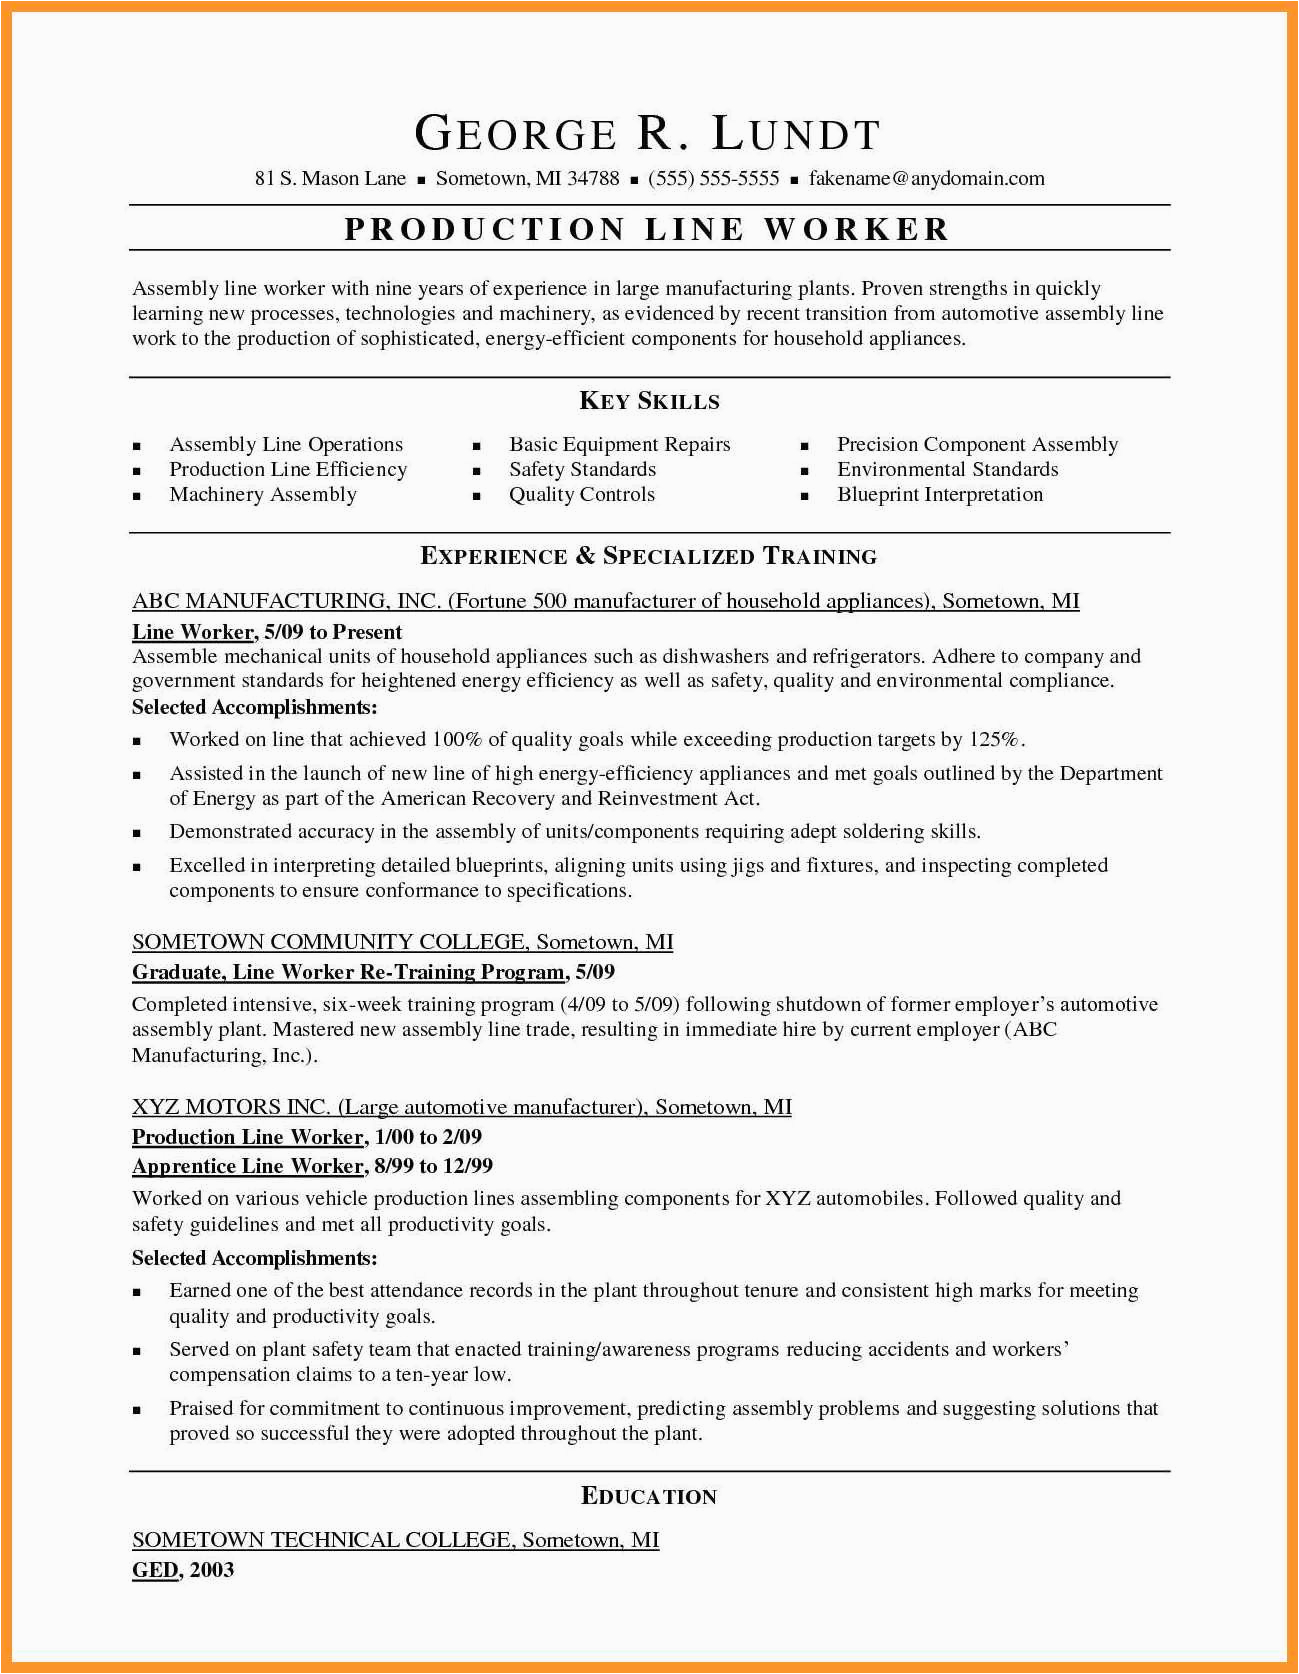 9 10 production resume objectives